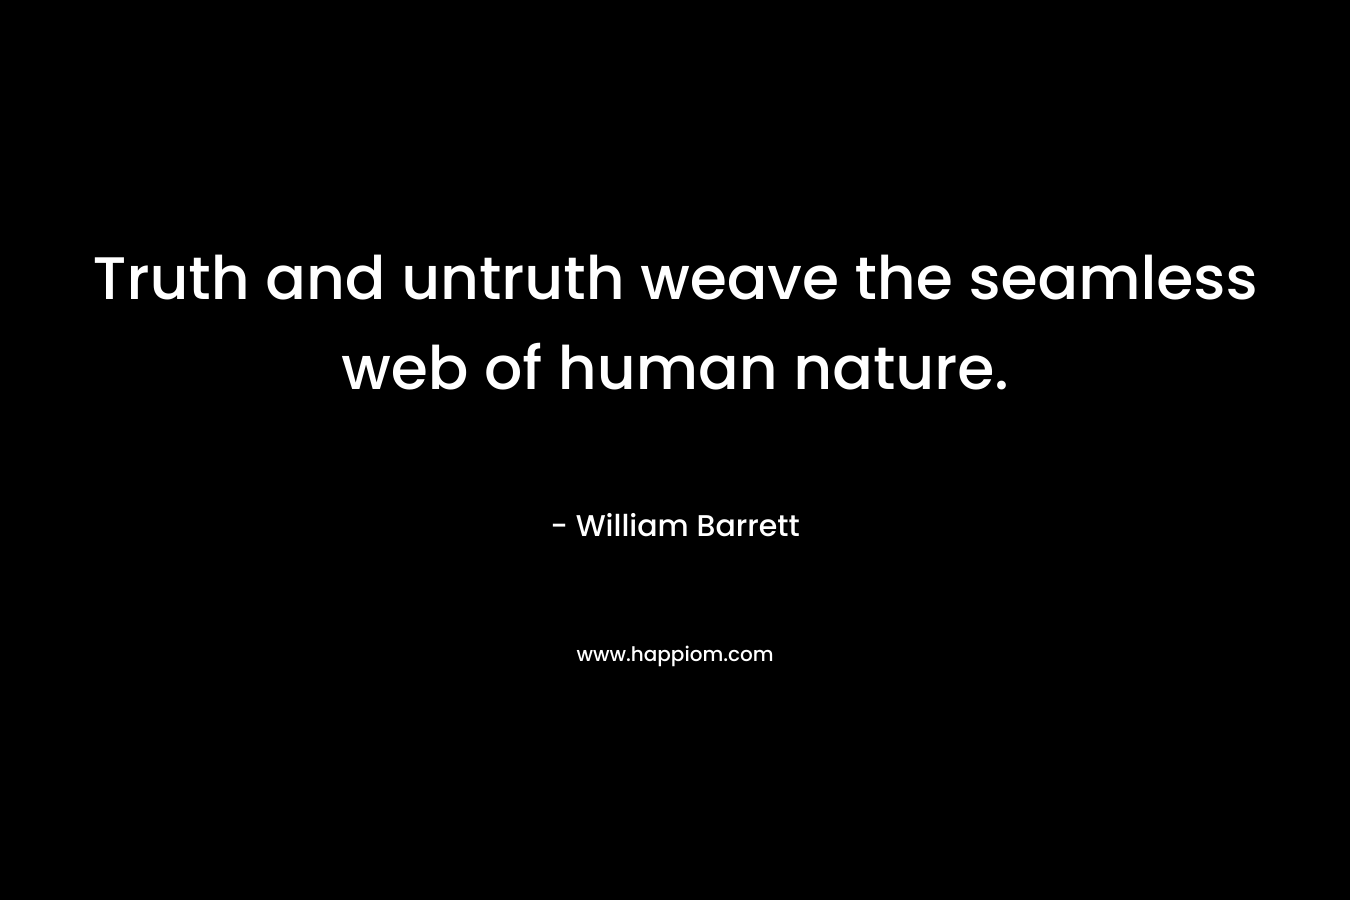 Truth and untruth weave the seamless web of human nature.